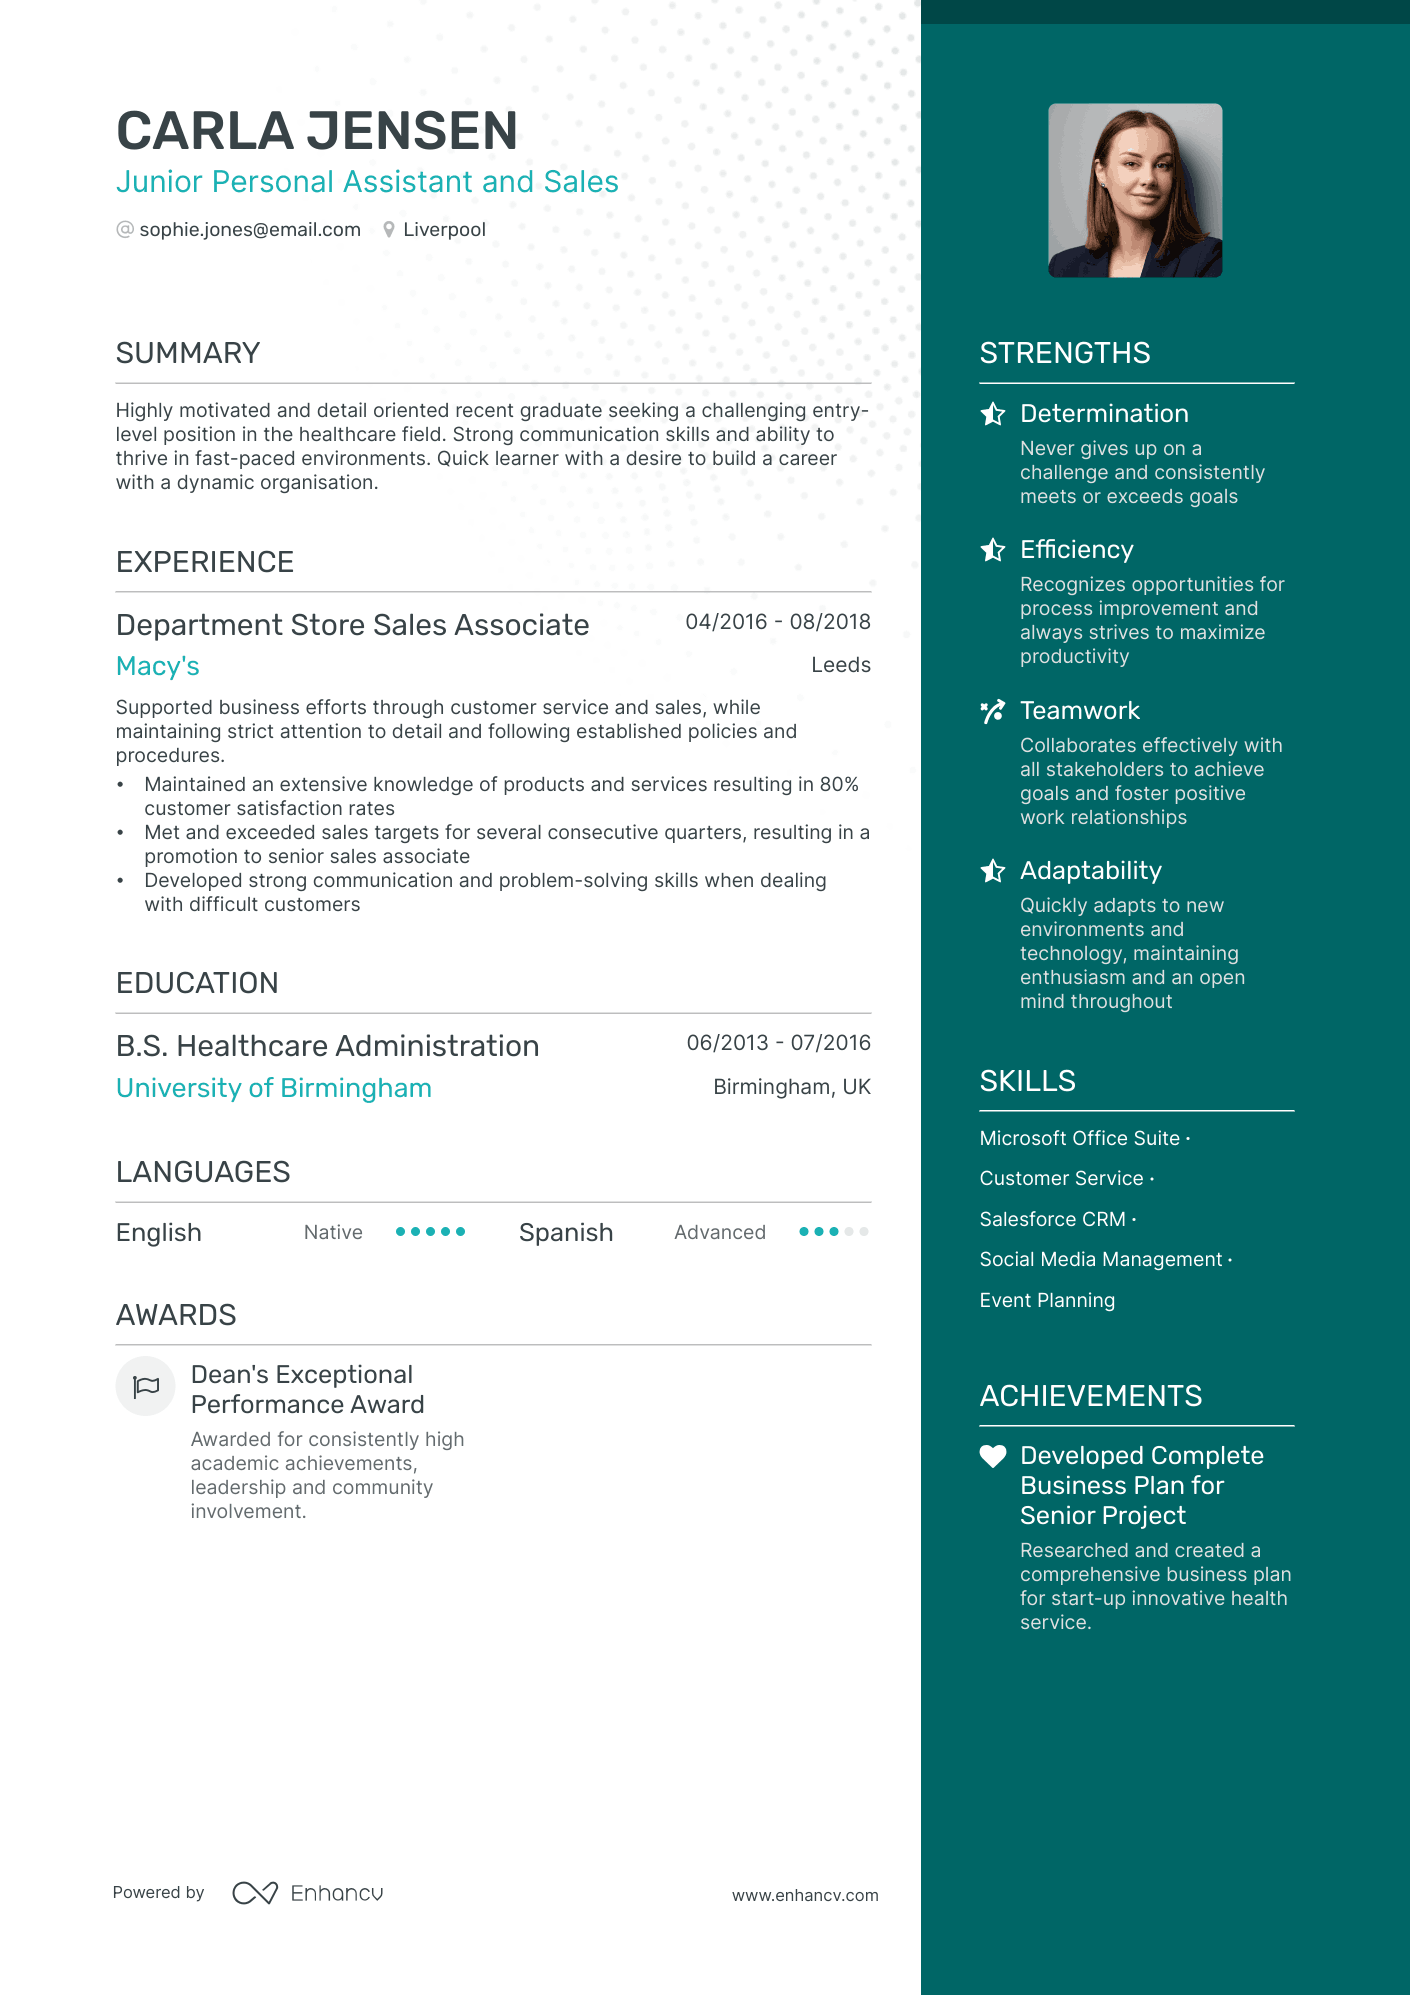 Junior Personal Assistant and Sales CV example